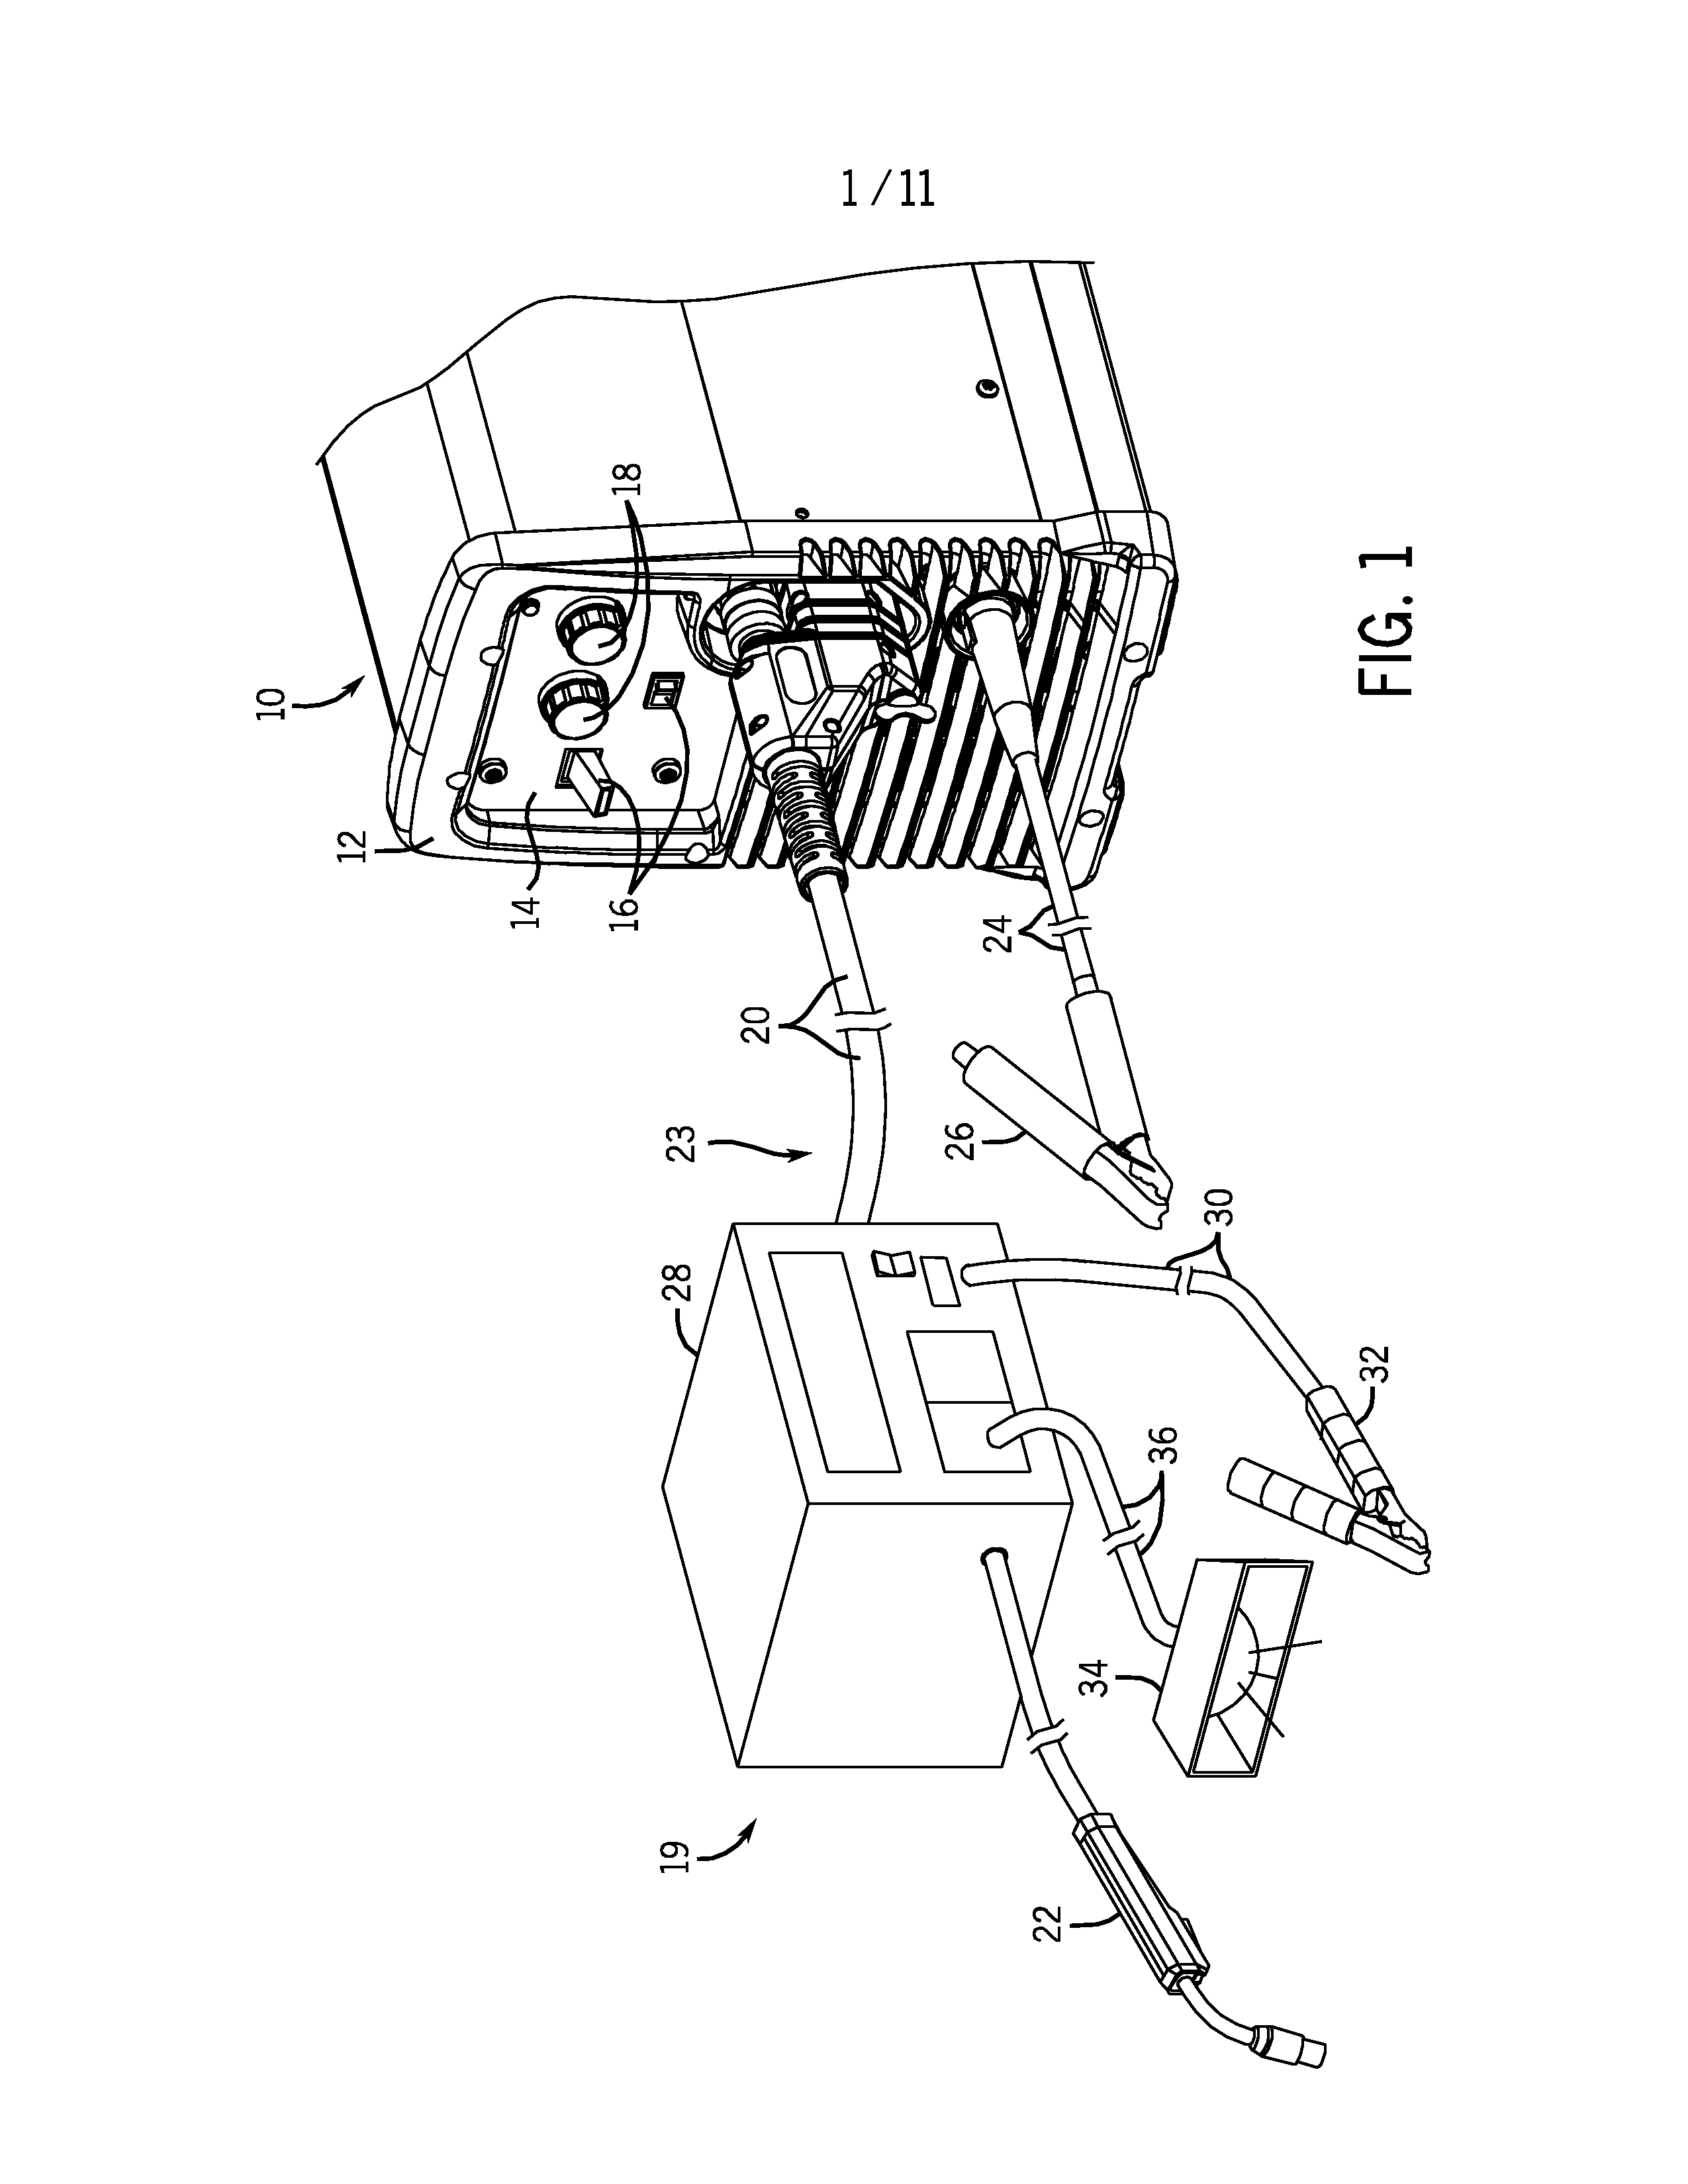 Welding power to auxiliary power conversion system and method